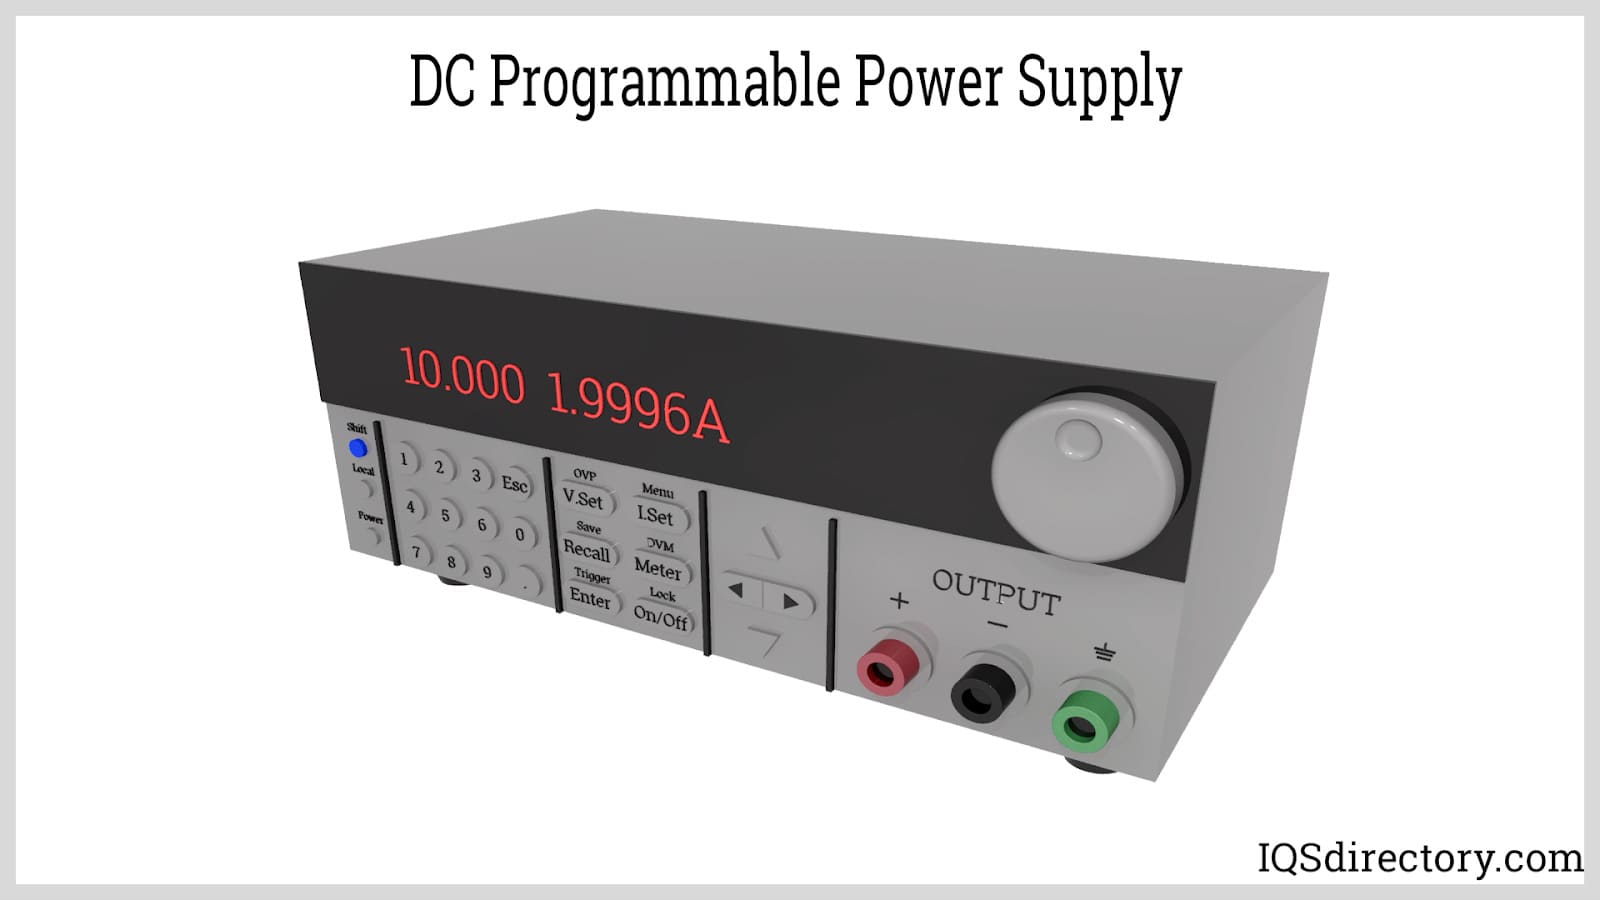 DC Programmable Power Supply